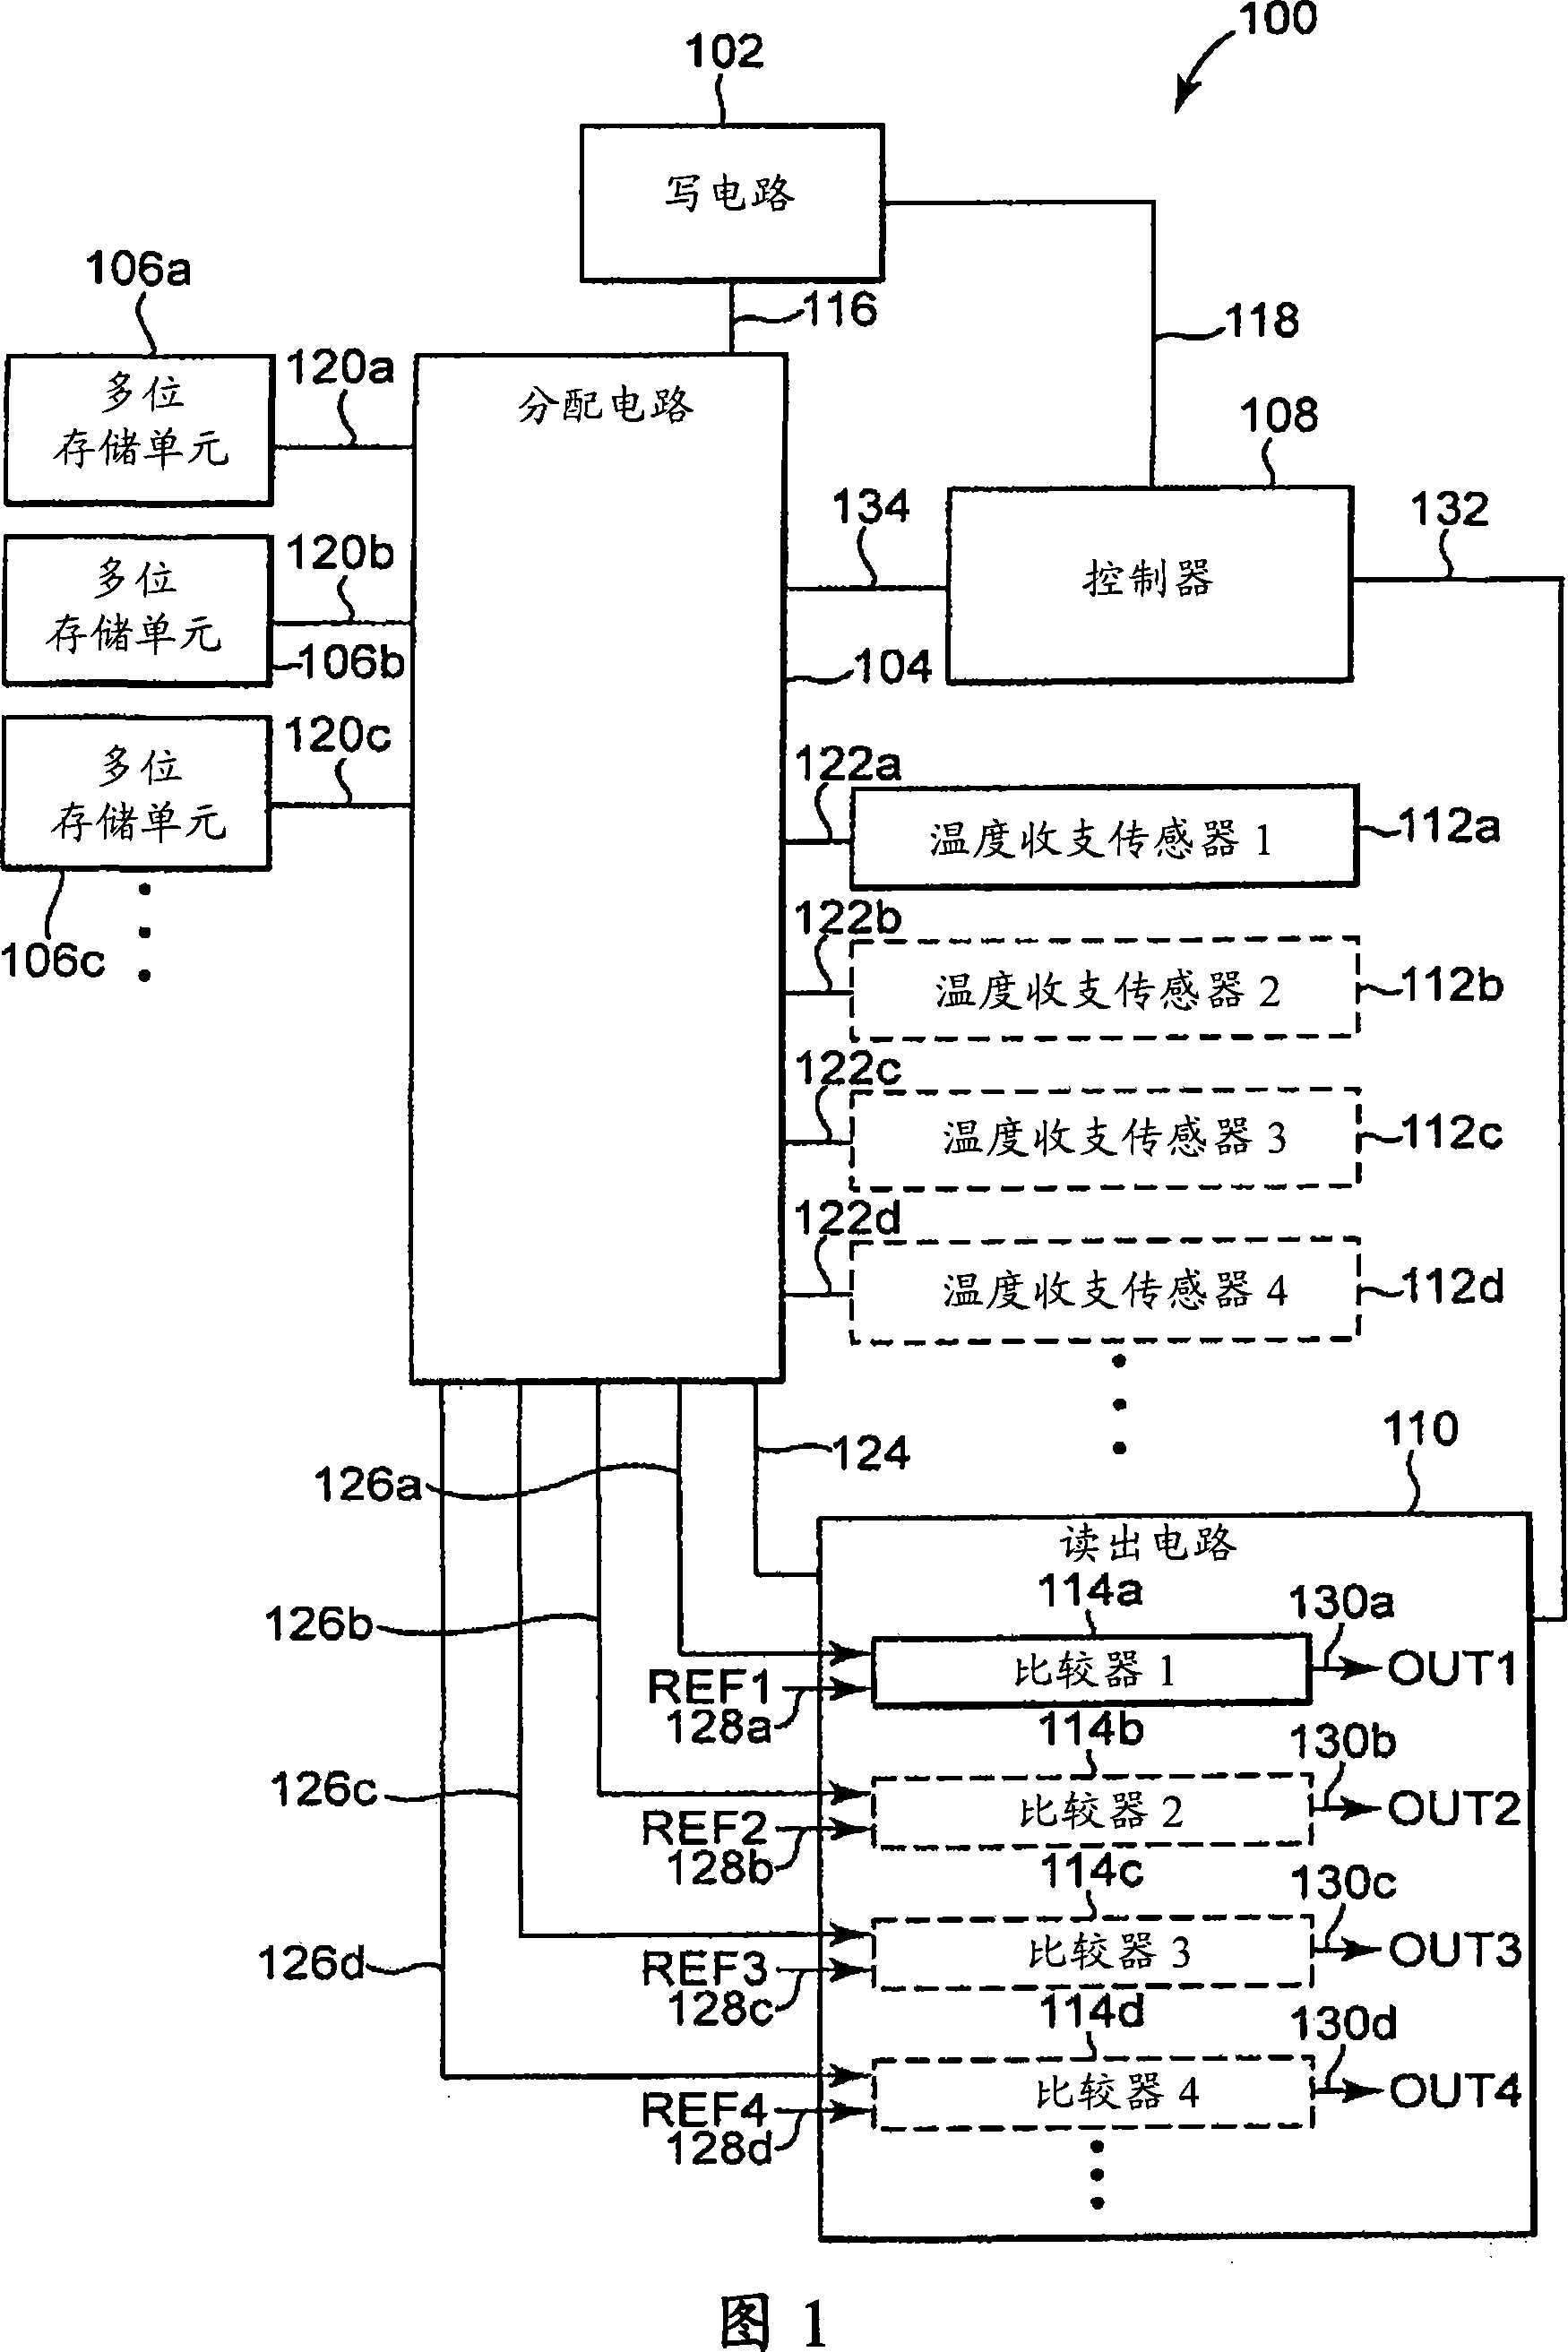 Semiconductor device including multi-bit memory cells and a temperature budget sensor